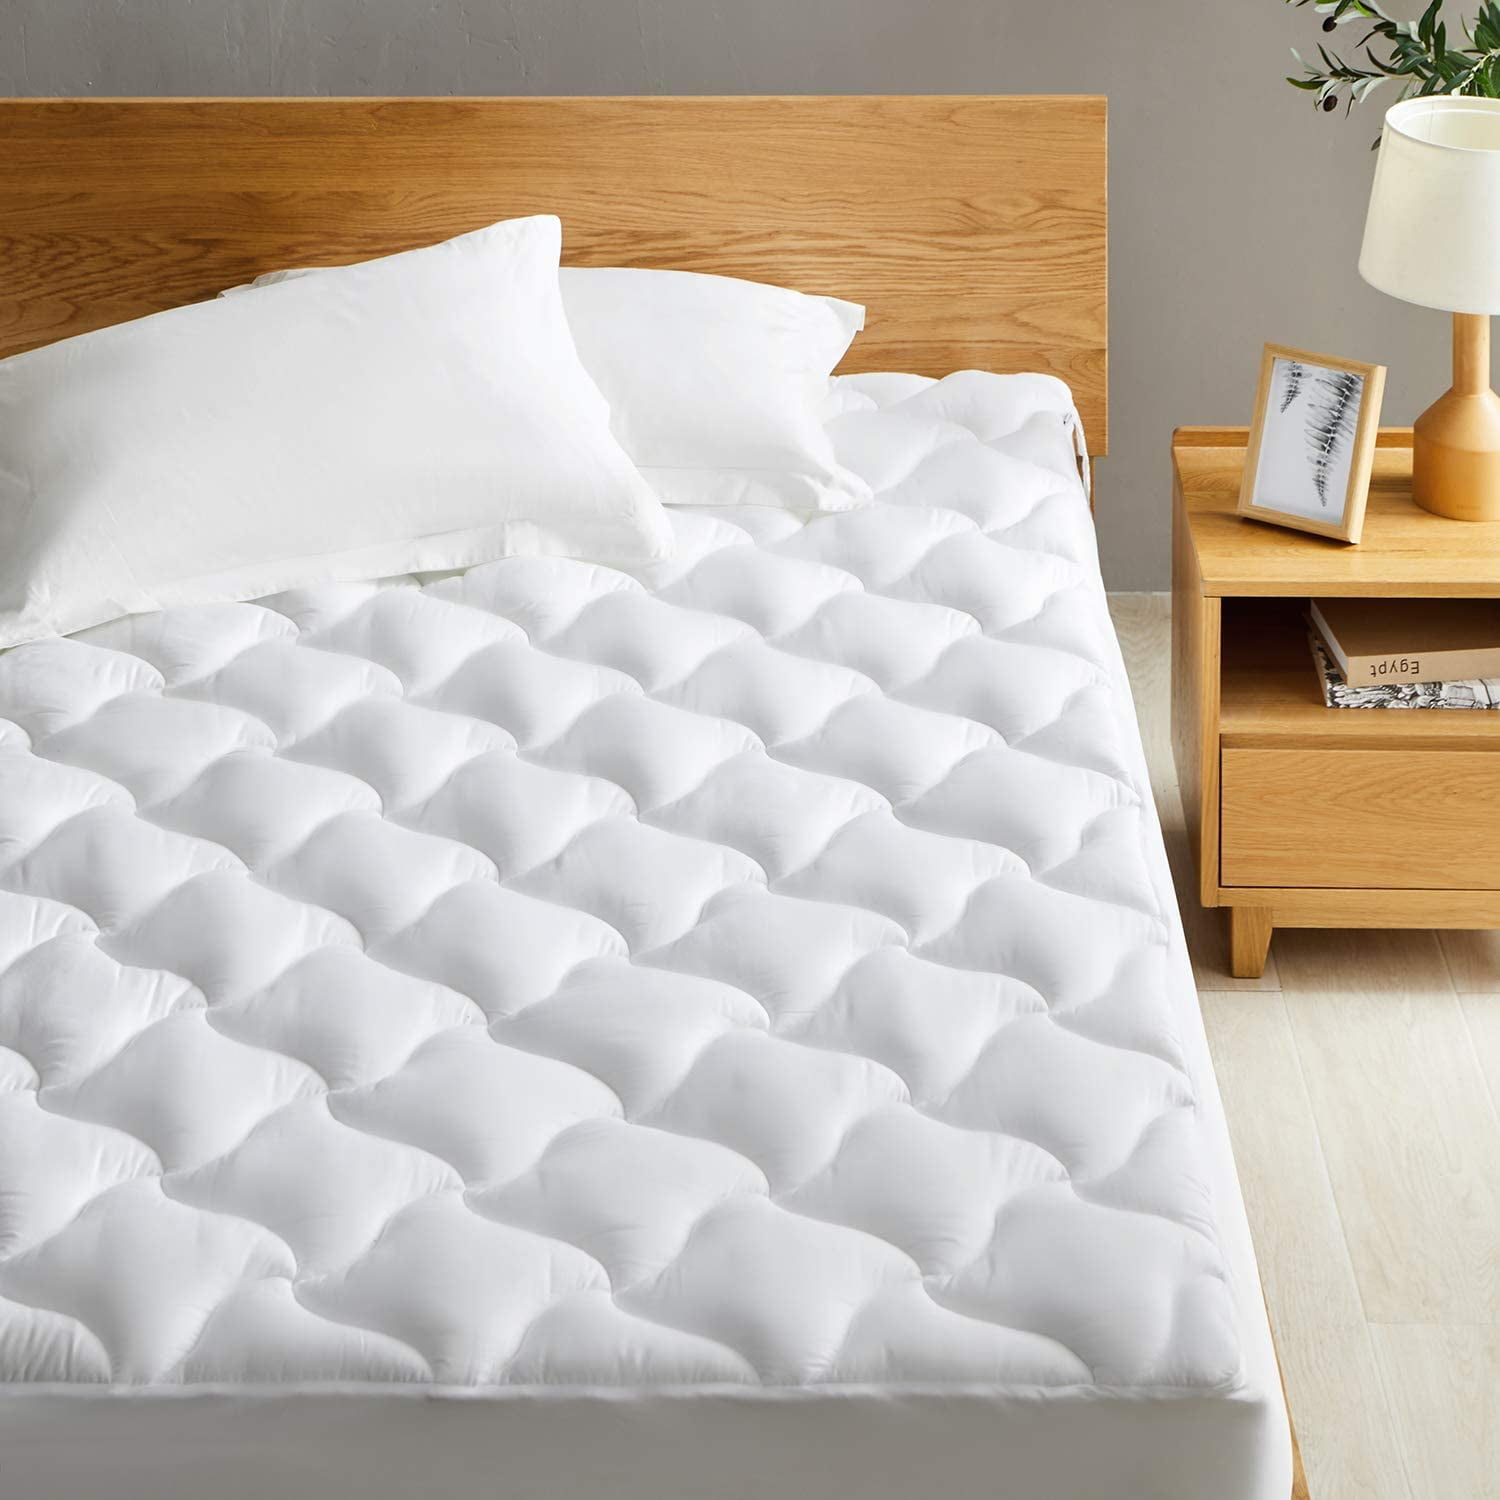 Western Home Cotton Queen Size Mattress Pad Cover, Thick Mattress